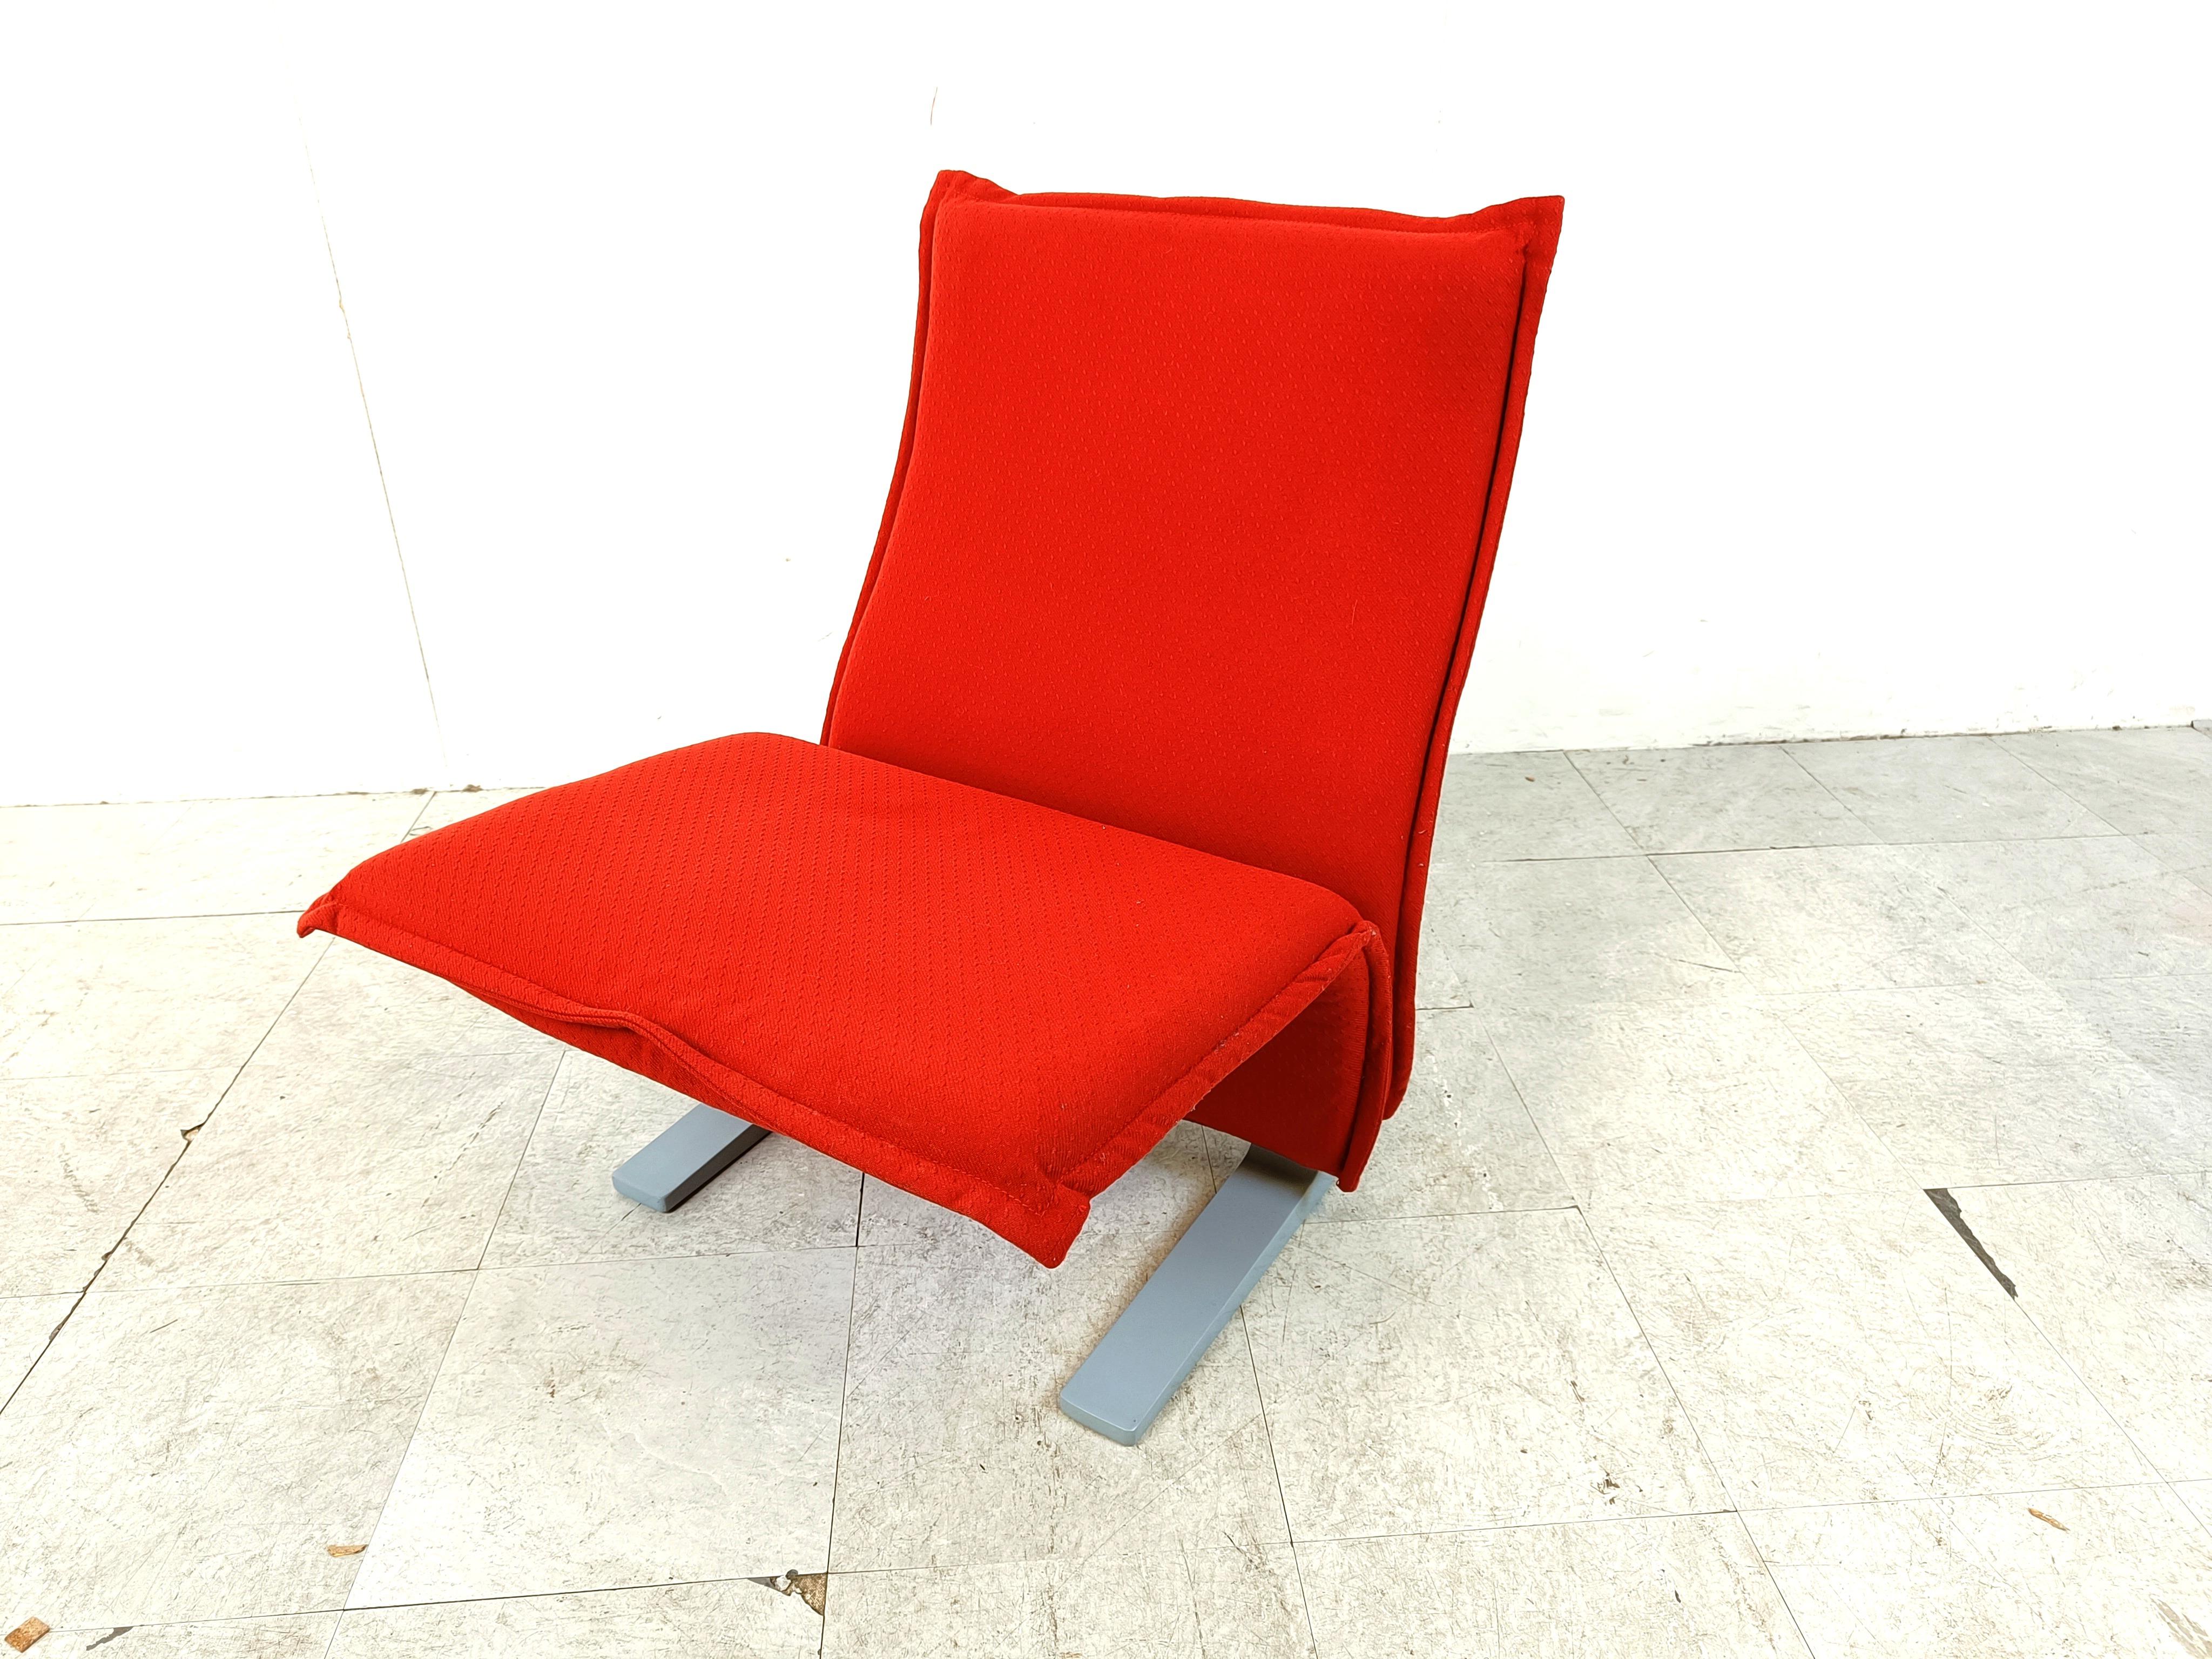 Iconic 'Concorde' lounge chair model F784 -  designed by Pierre Paulin for the waiting spaces of the famous Concorde airplane.

The chair has a timeless design with itsd original red/orange fabric.

The chairs have lacquered metal bases.

1970s -